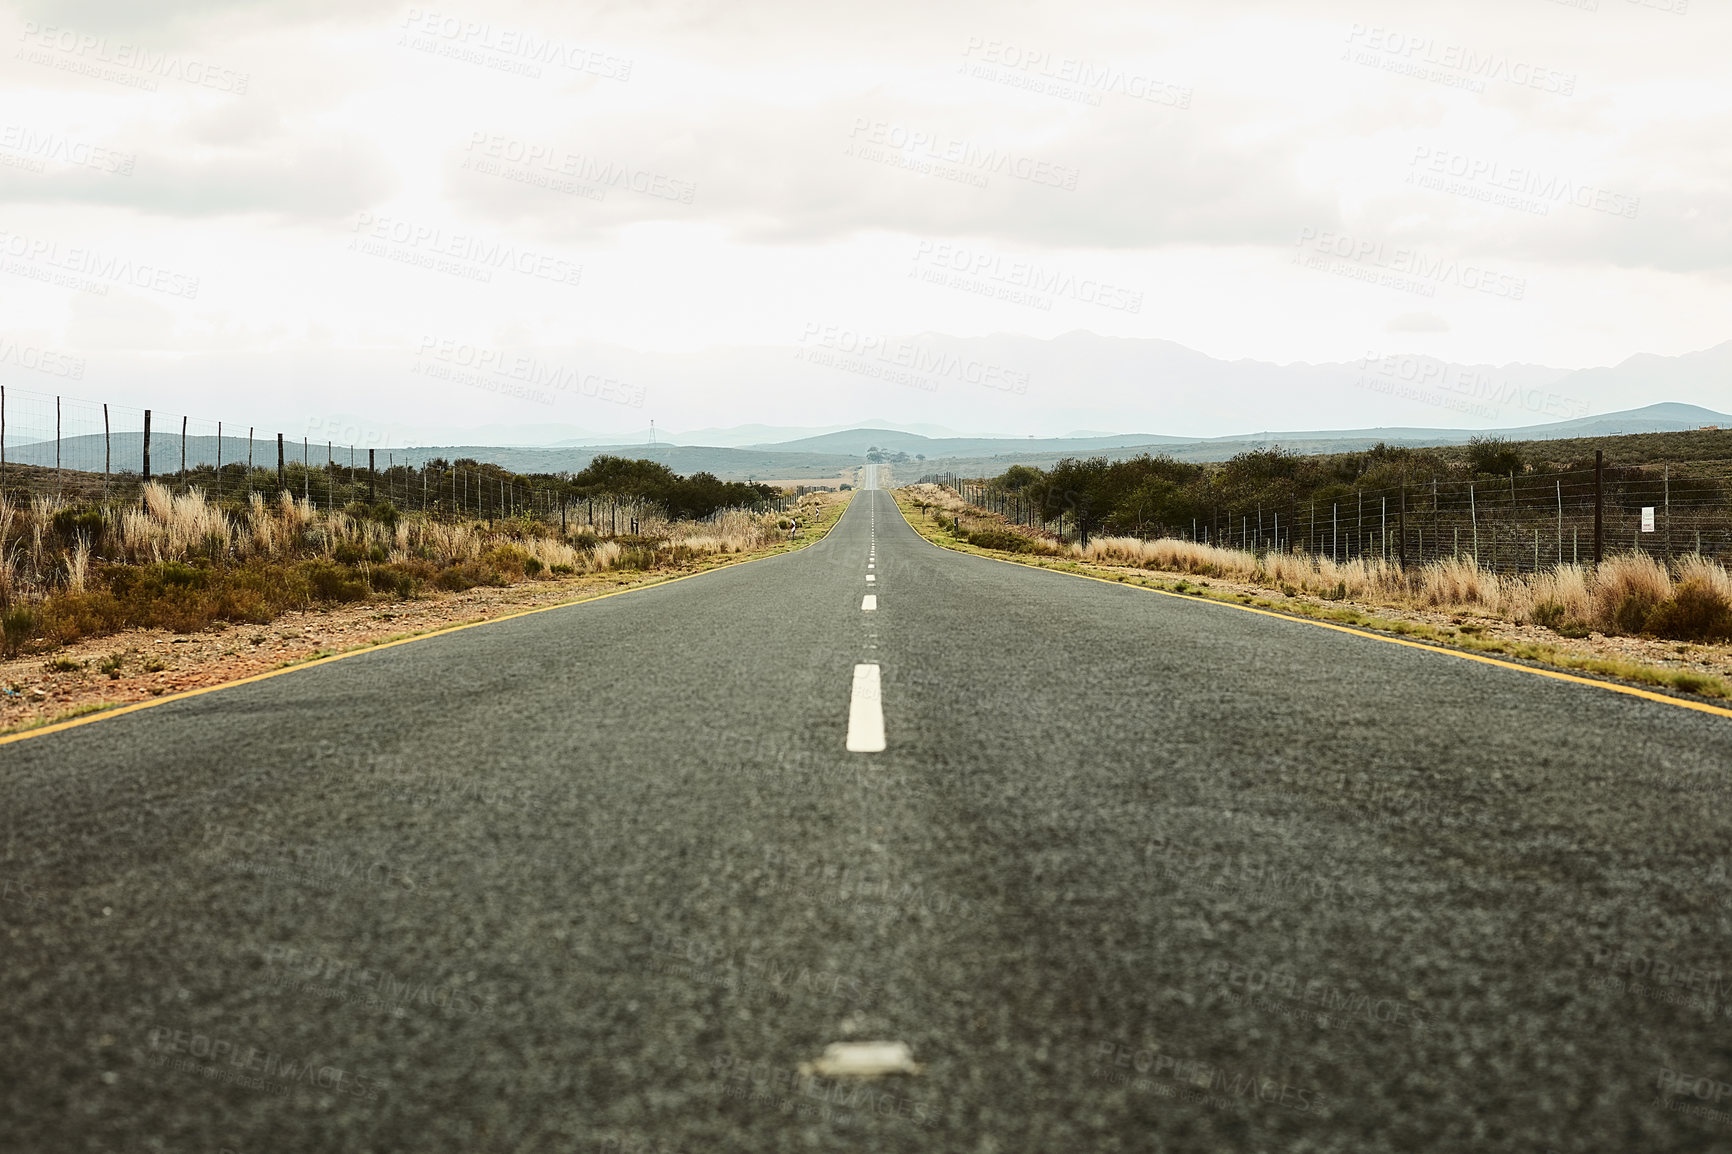 Buy stock photo Shot of a long open road stretching out far away into the distance